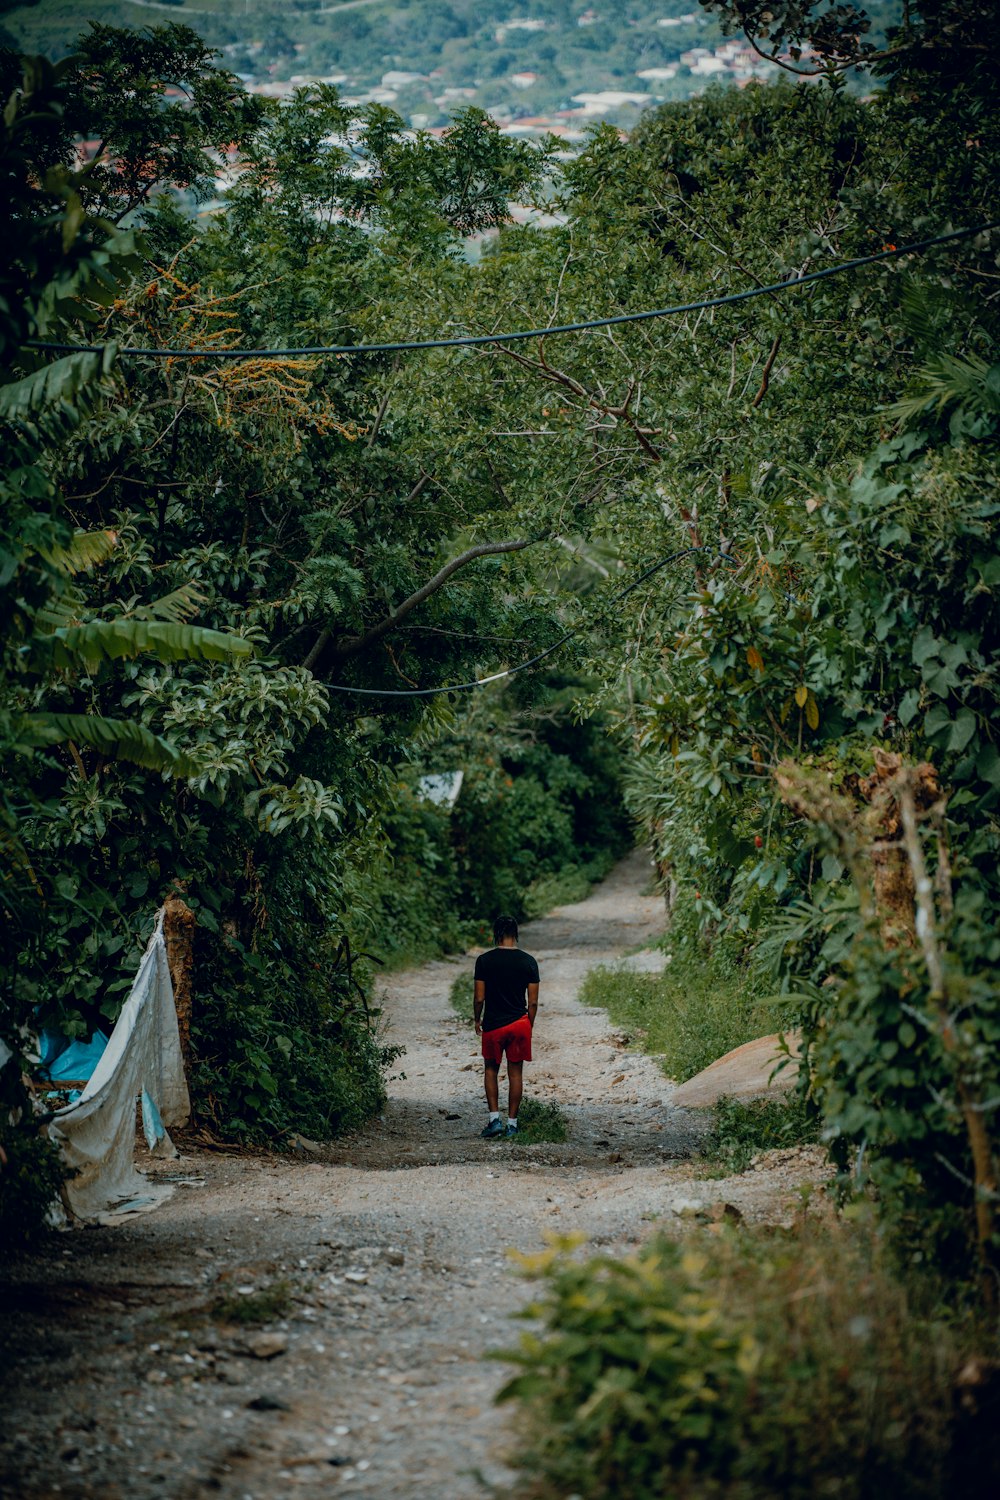 a person walking down a dirt road surrounded by trees